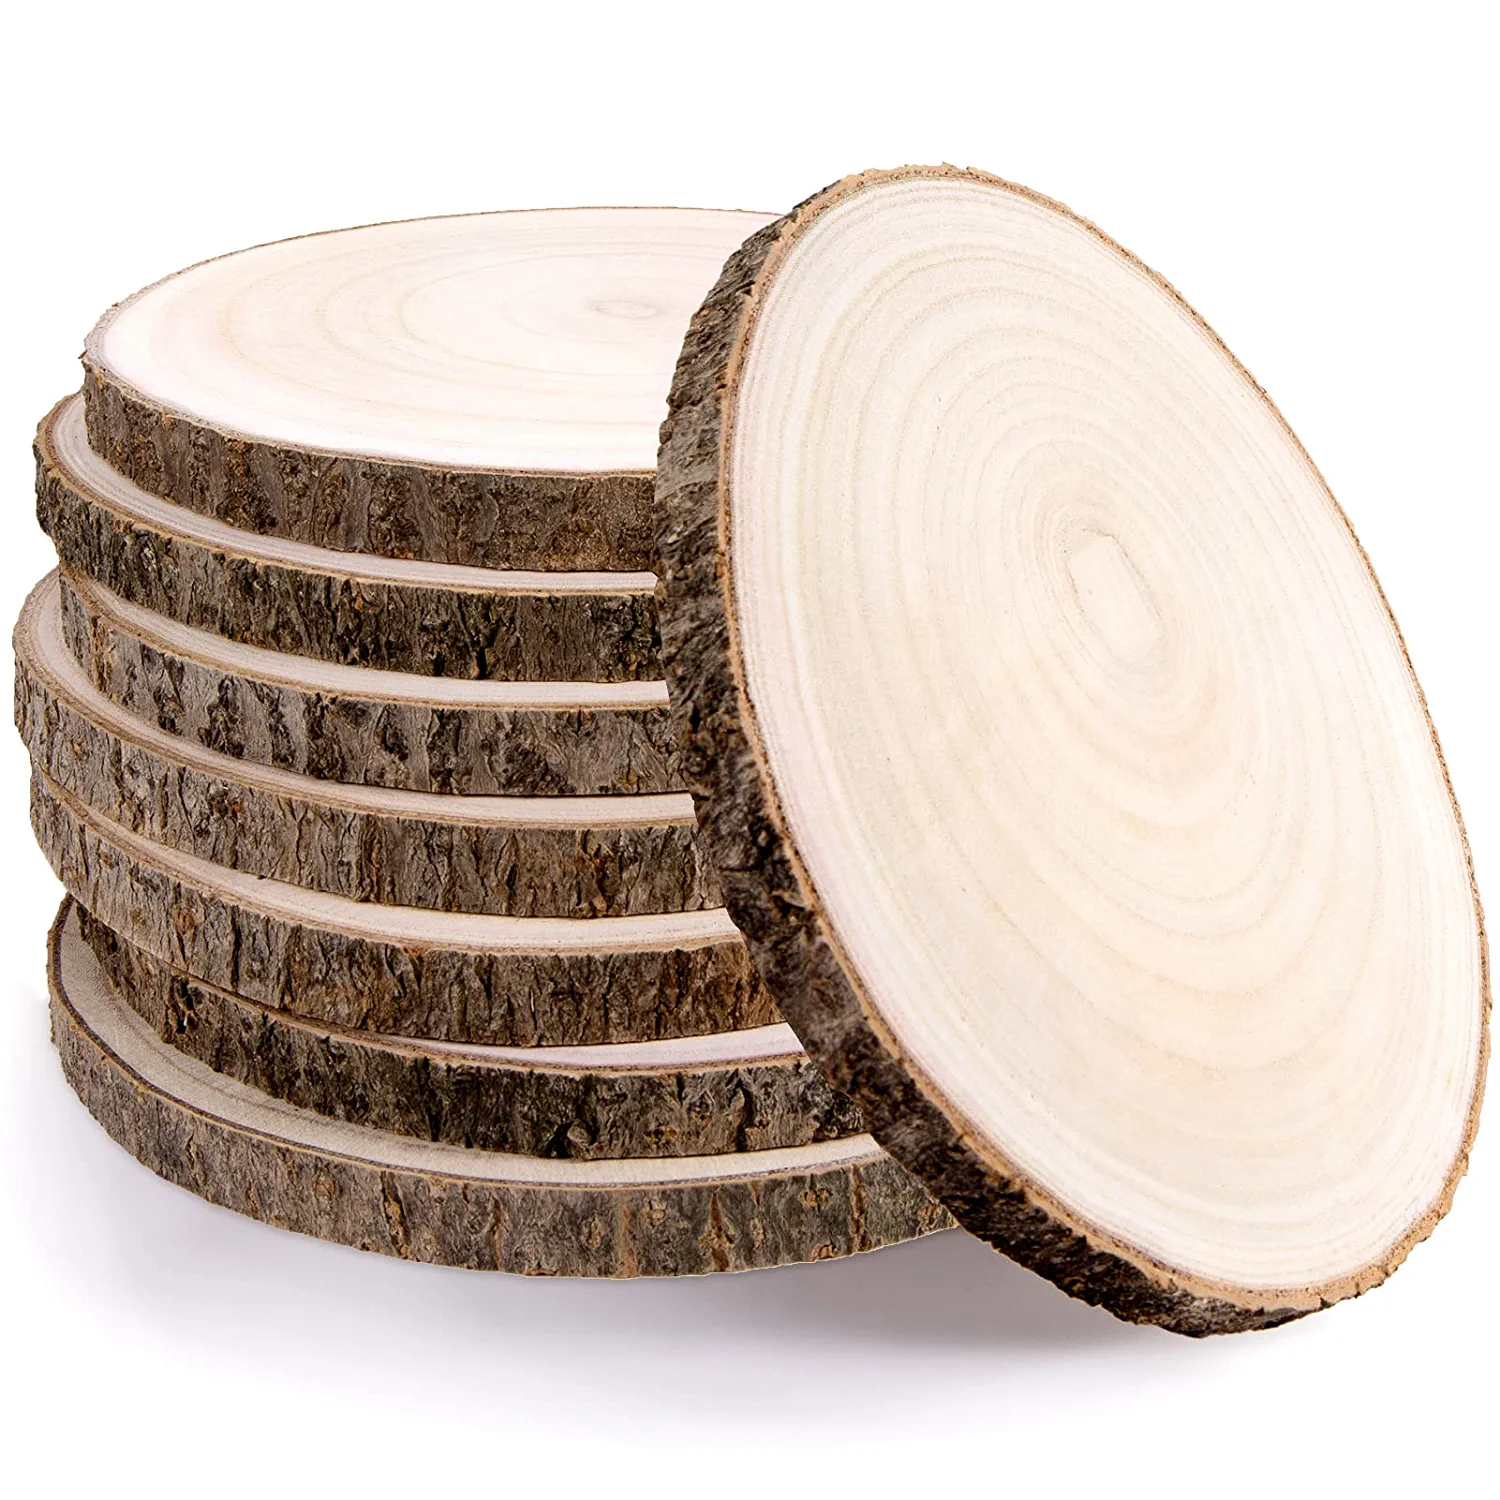 8 Pack 8-9 Inch Round Rustic Wood Slices For Weddings, Table Centerpiece... - $57.99